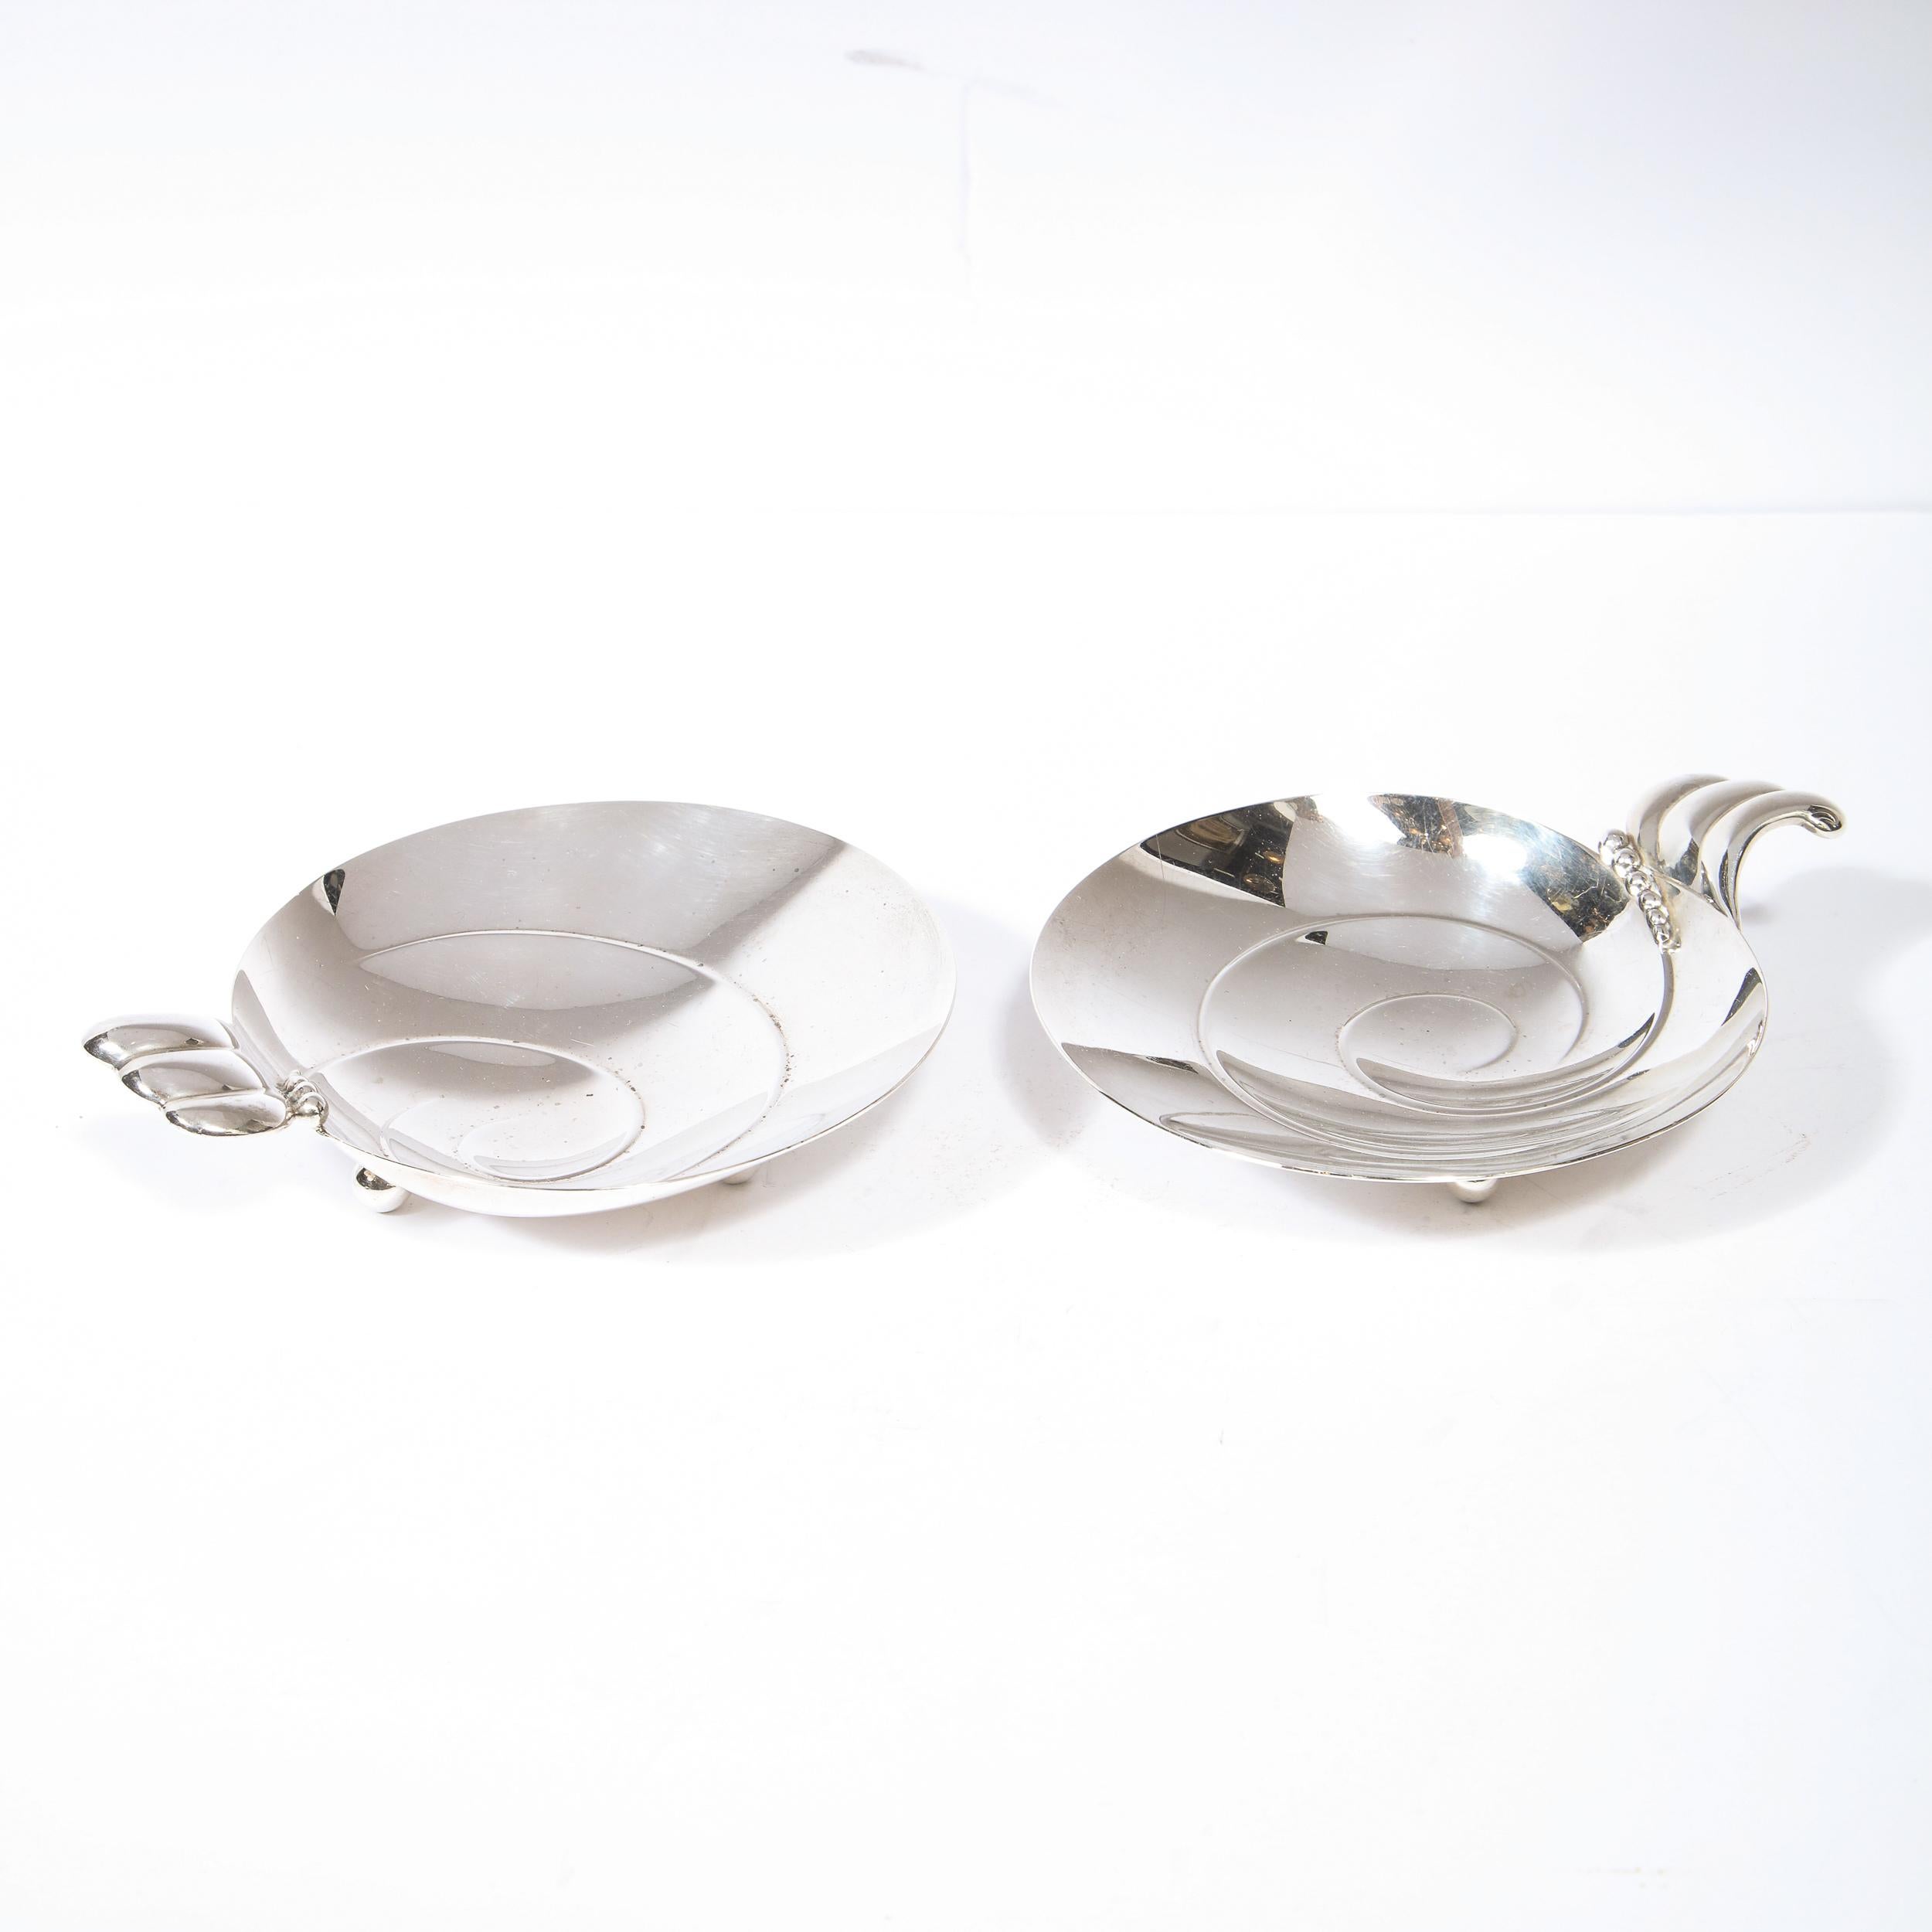 Mid-20th Century Pair of Mid Century Modern Sterling Silver Footed Dishes Signed Tiffany & Co.